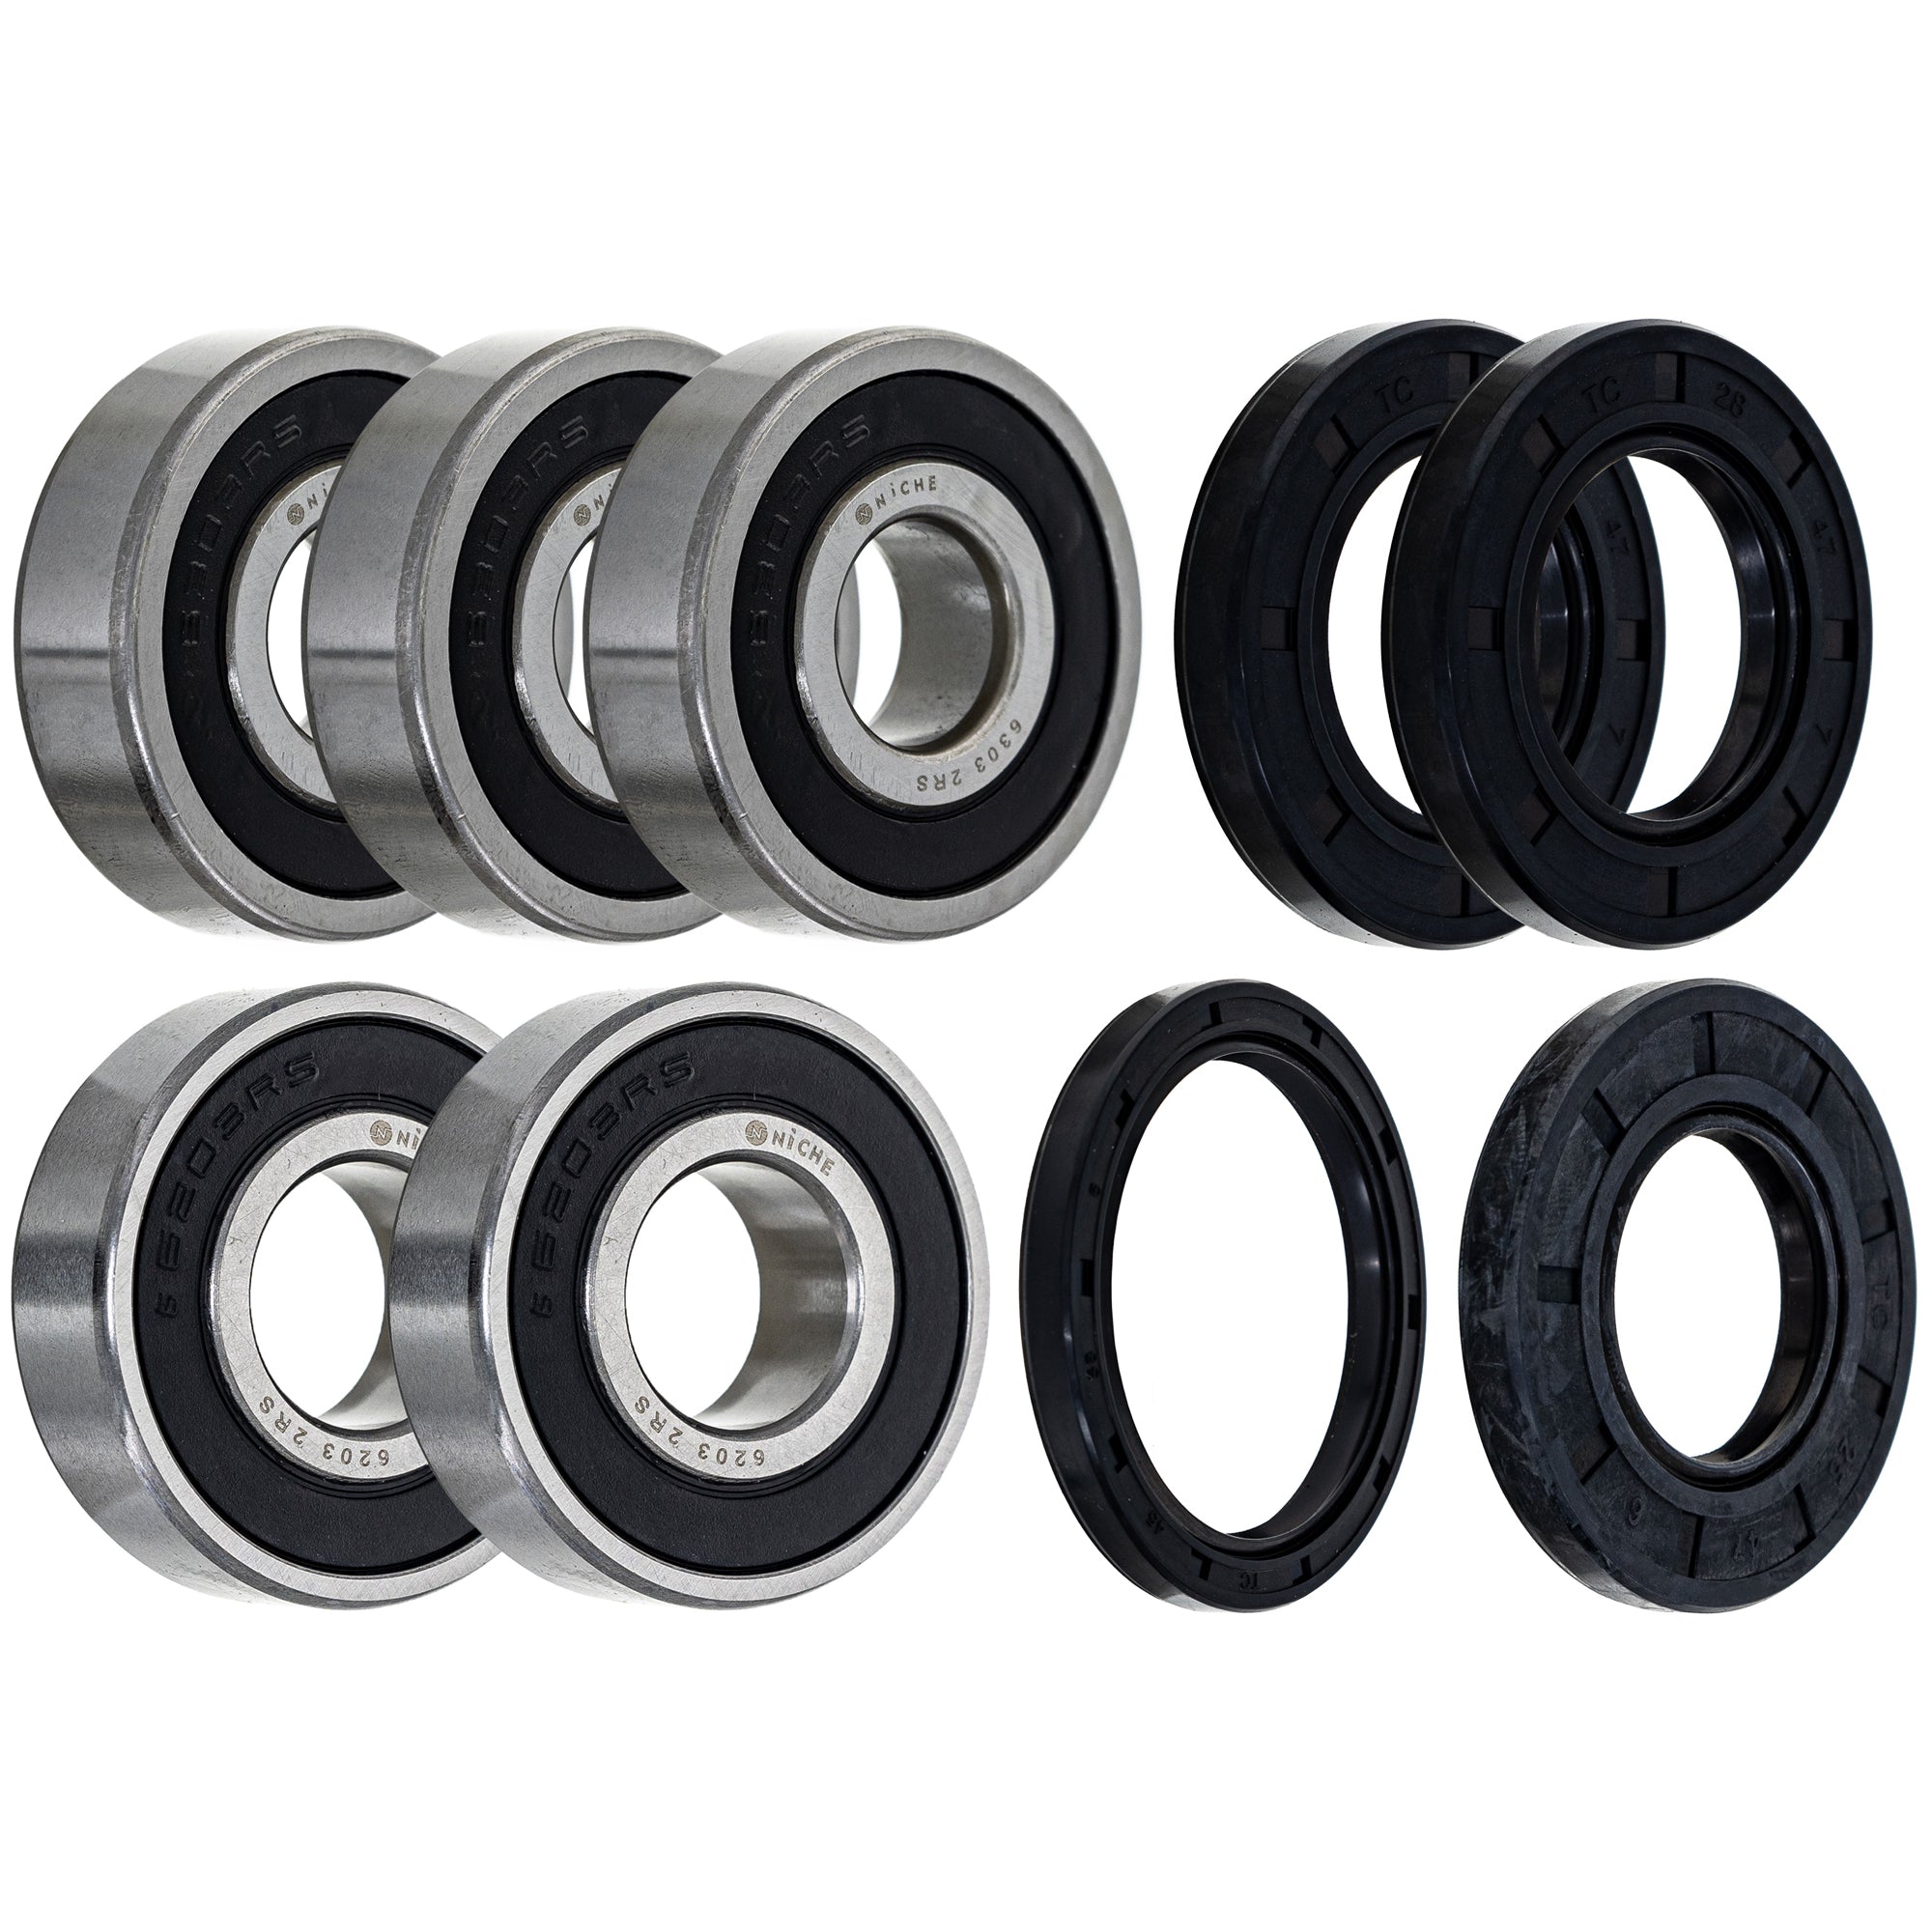 Wheel Bearing Seal Kit for zOTHER Ref No V NICHE MK1008666